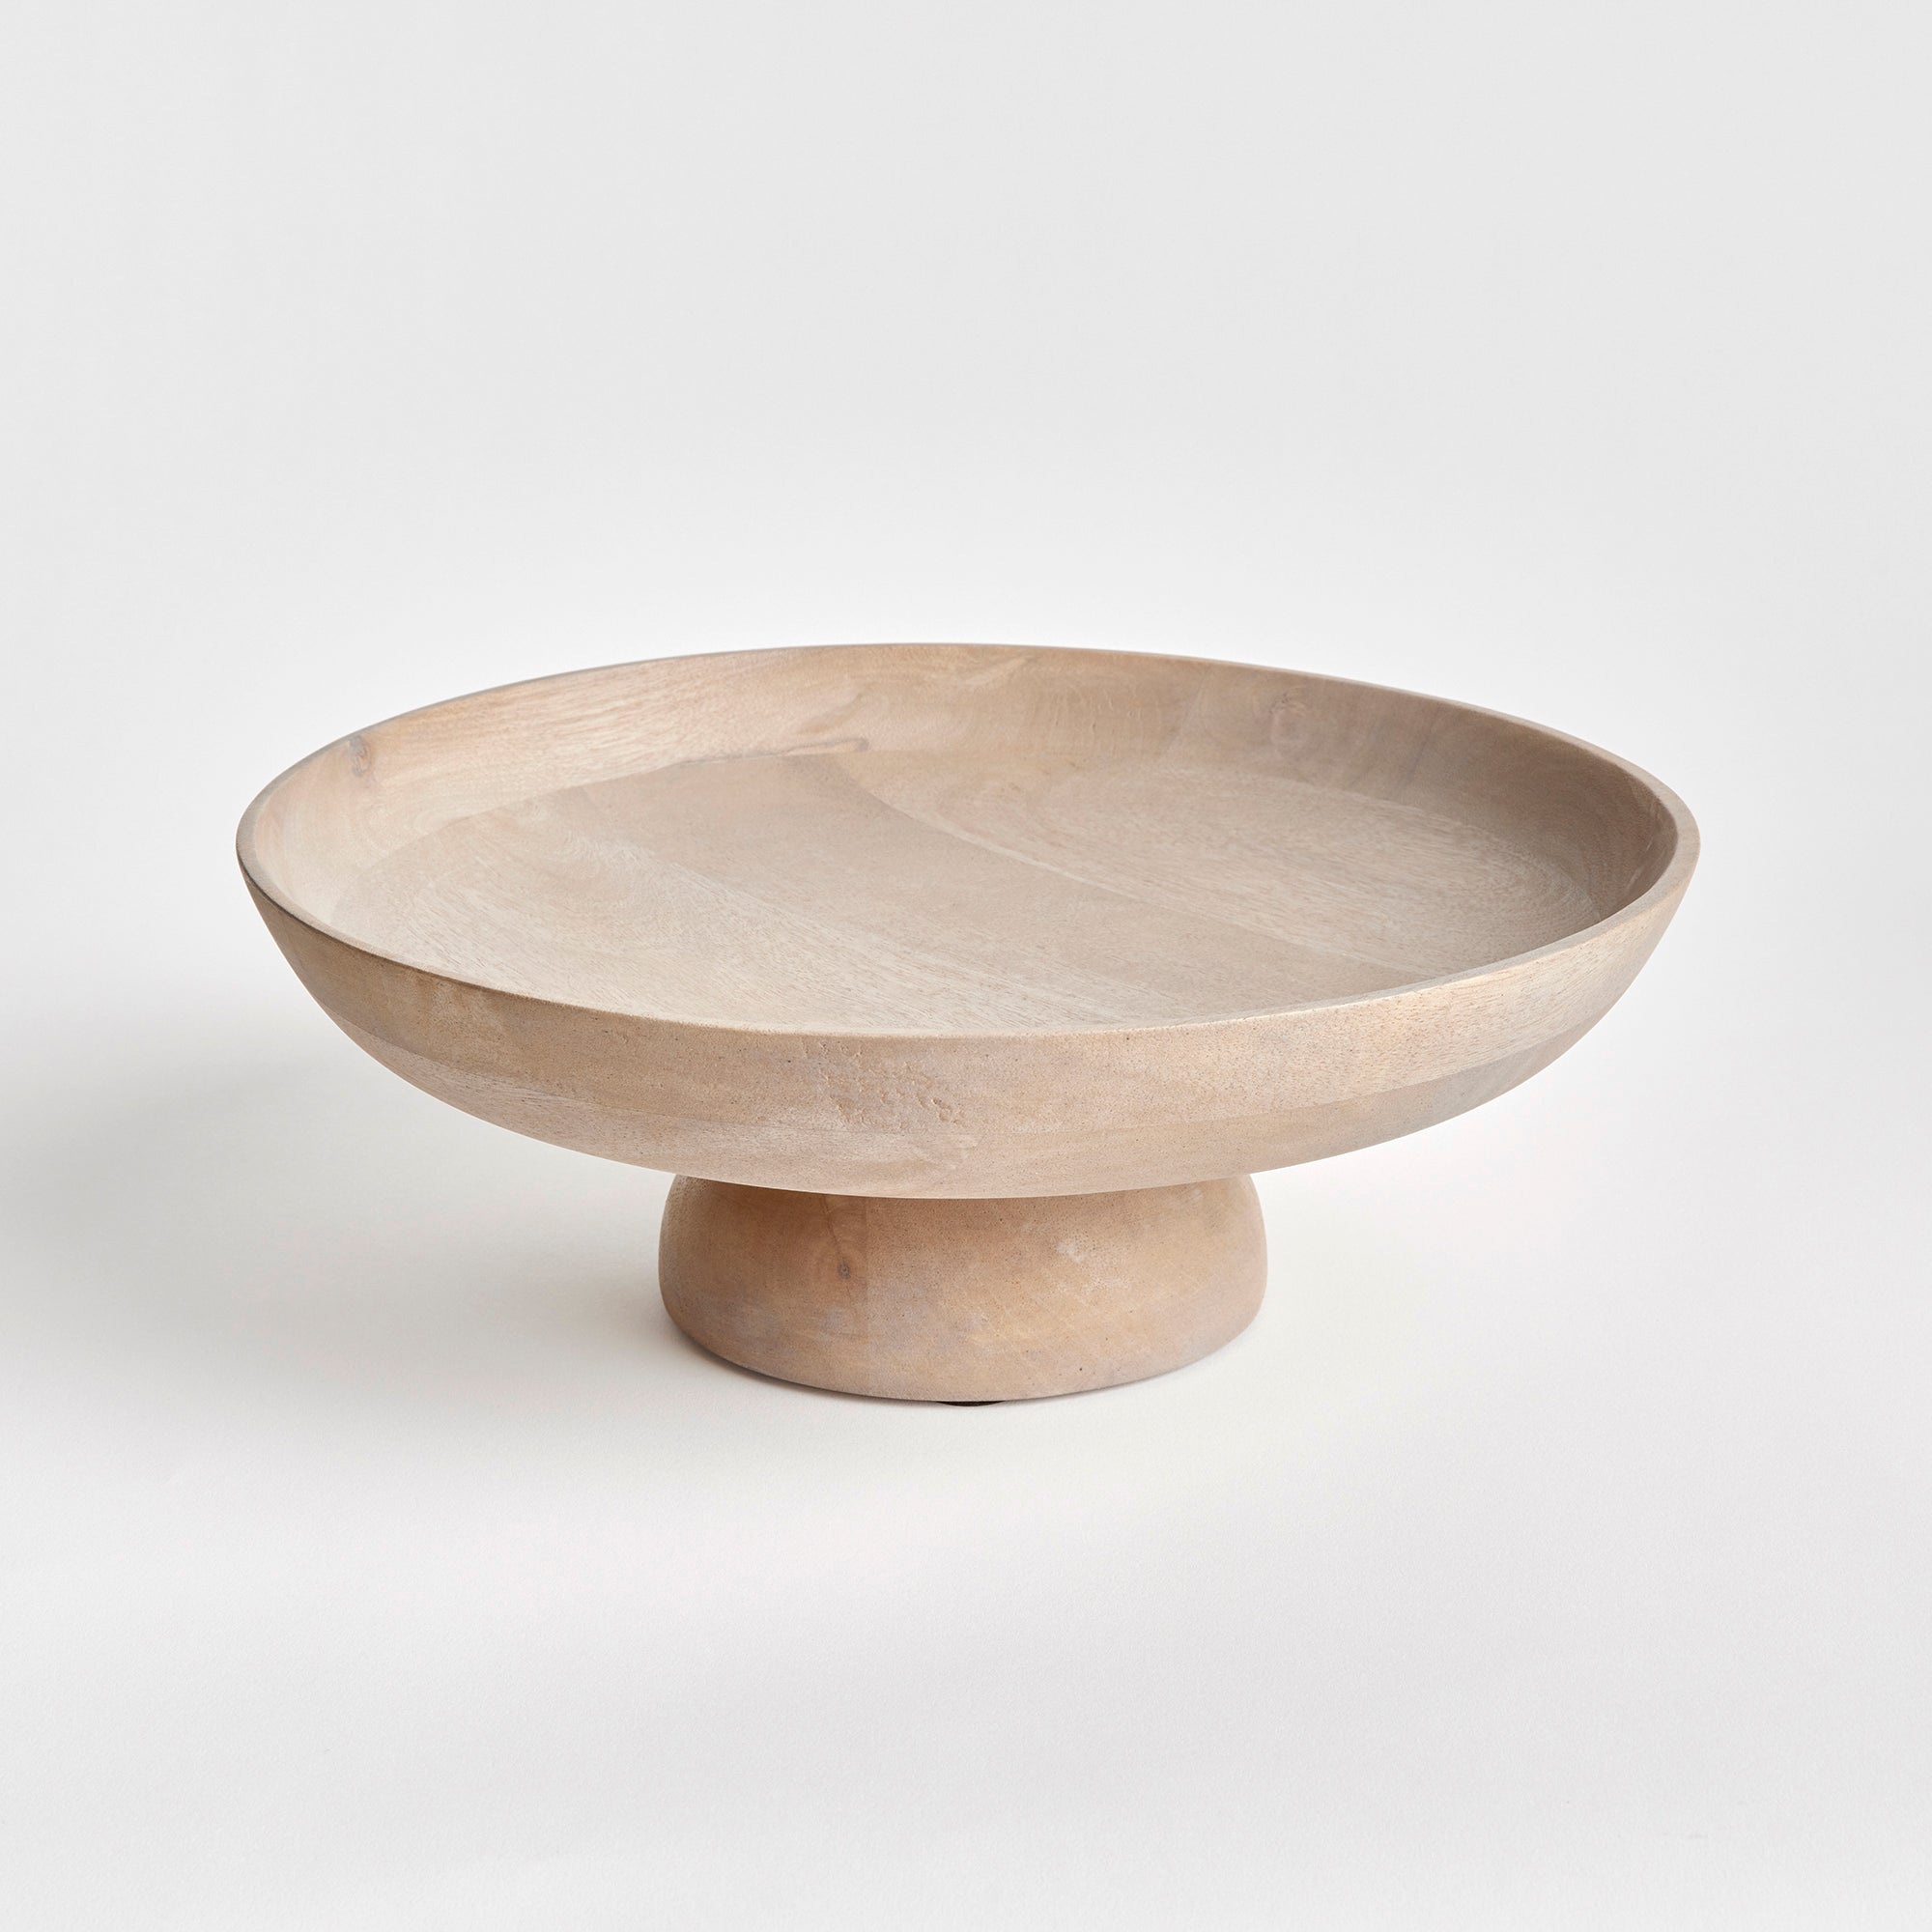 Contemporary and uniquely designed, this footed bowl is made of mango wood. Makes a beautiful serving bowl for dry foods, as well as a gorgeous centerpiece all on its own. Amethyst Home provides interior design, new construction, custom furniture, and area rugs in the Laguna Beach metro area.